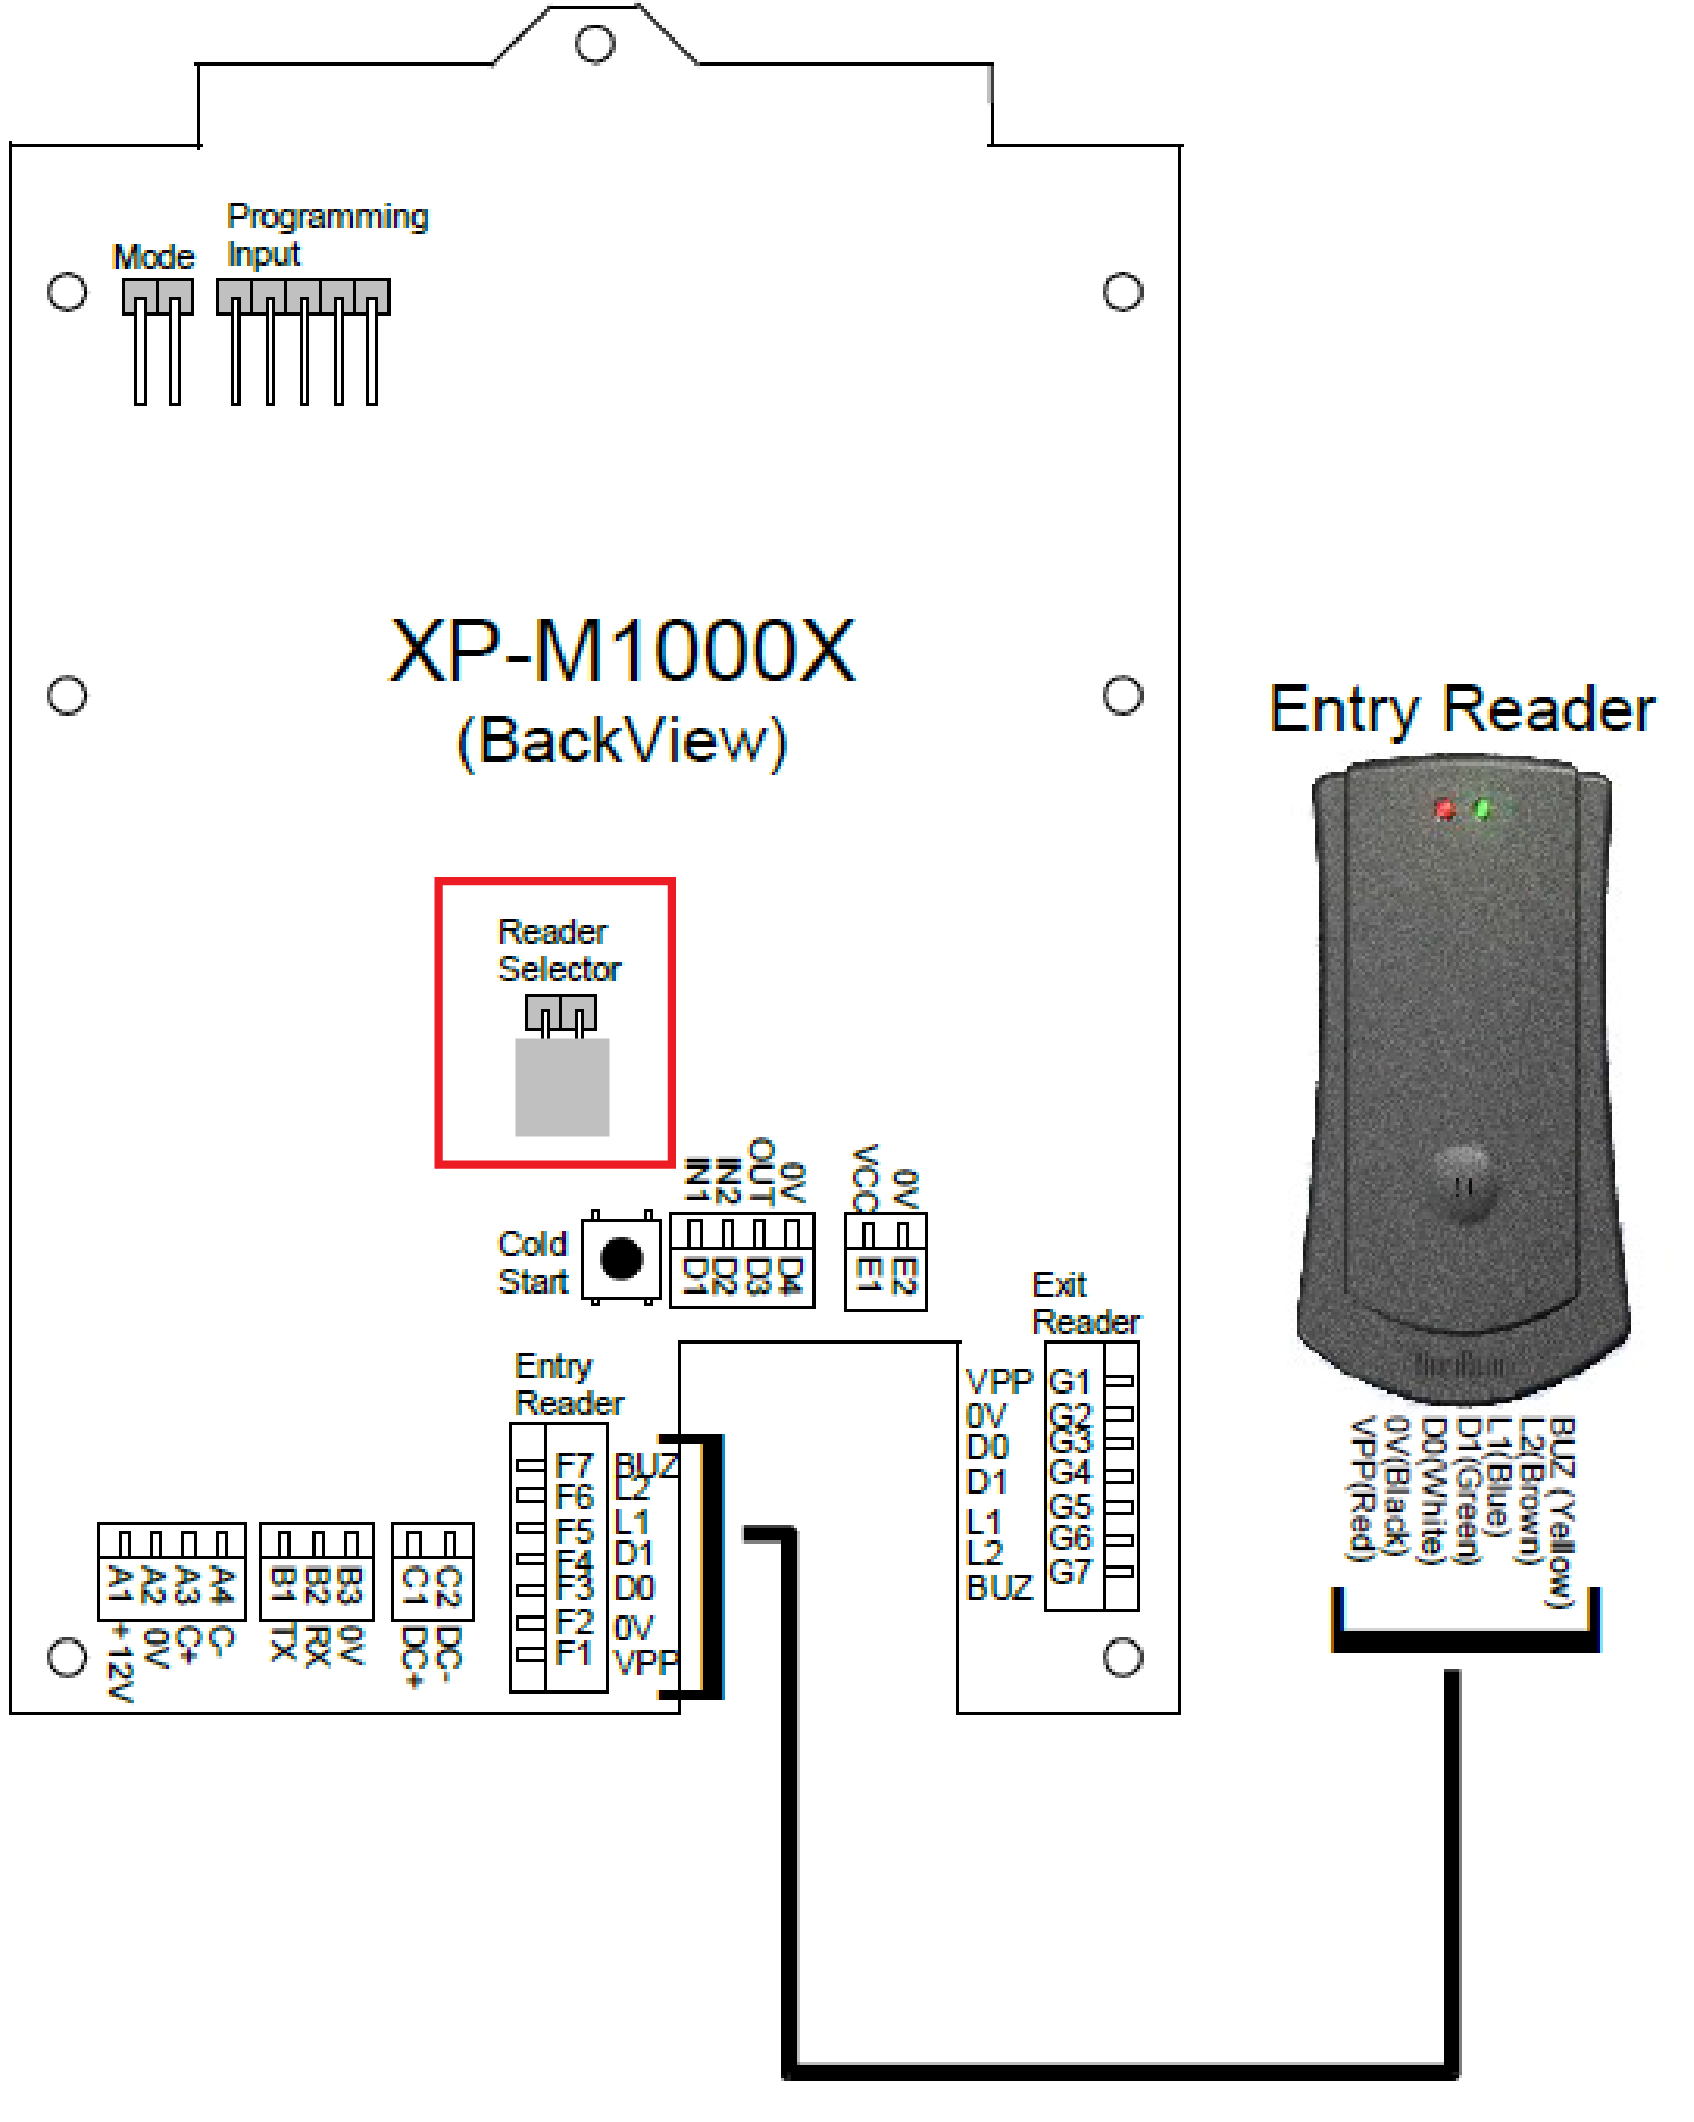 Wiring Diagram from XP-M1000X Controller to XP-RDPRX Reader